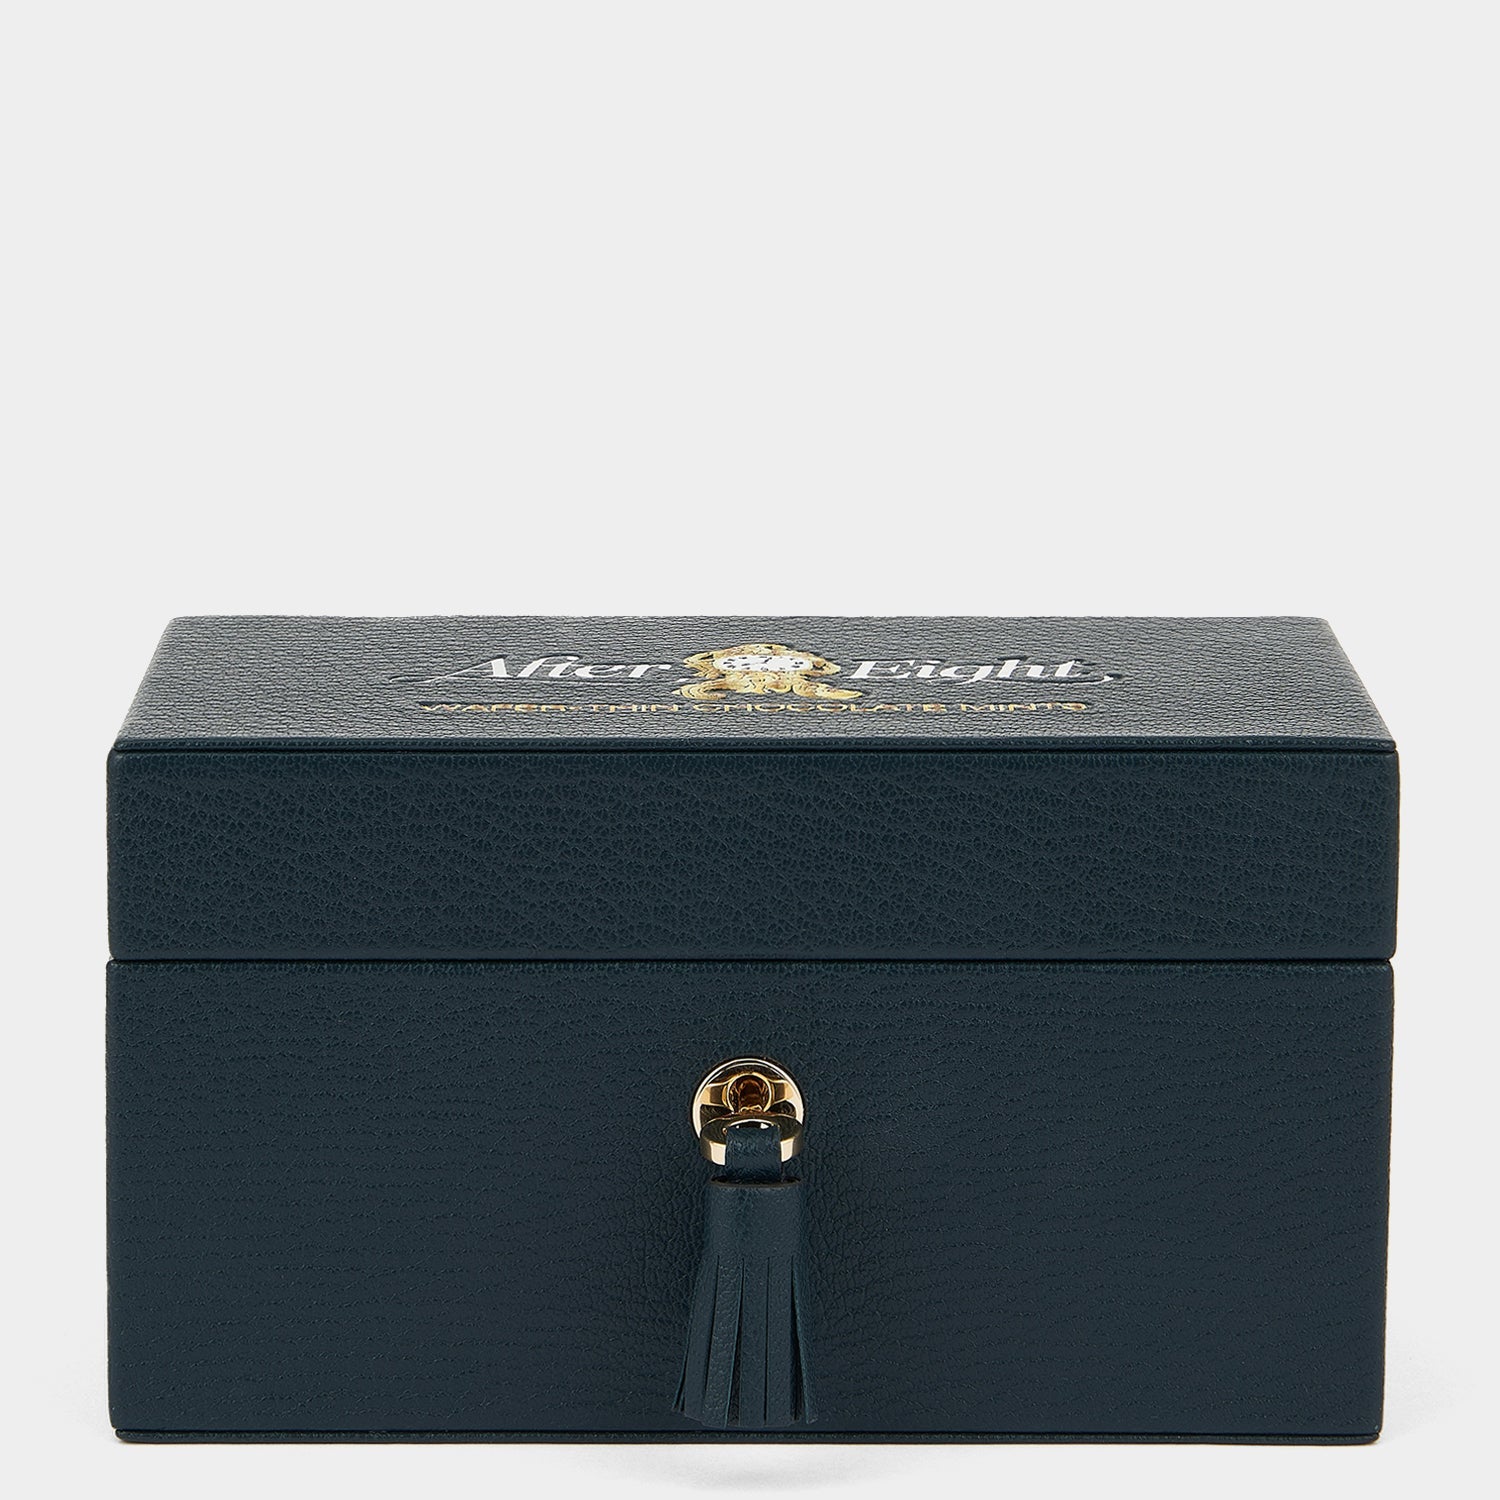 Anya Brands After Eight Box -

                  
                    Capra Leather in Dark Holly -
                  

                  Anya Hindmarch EU
